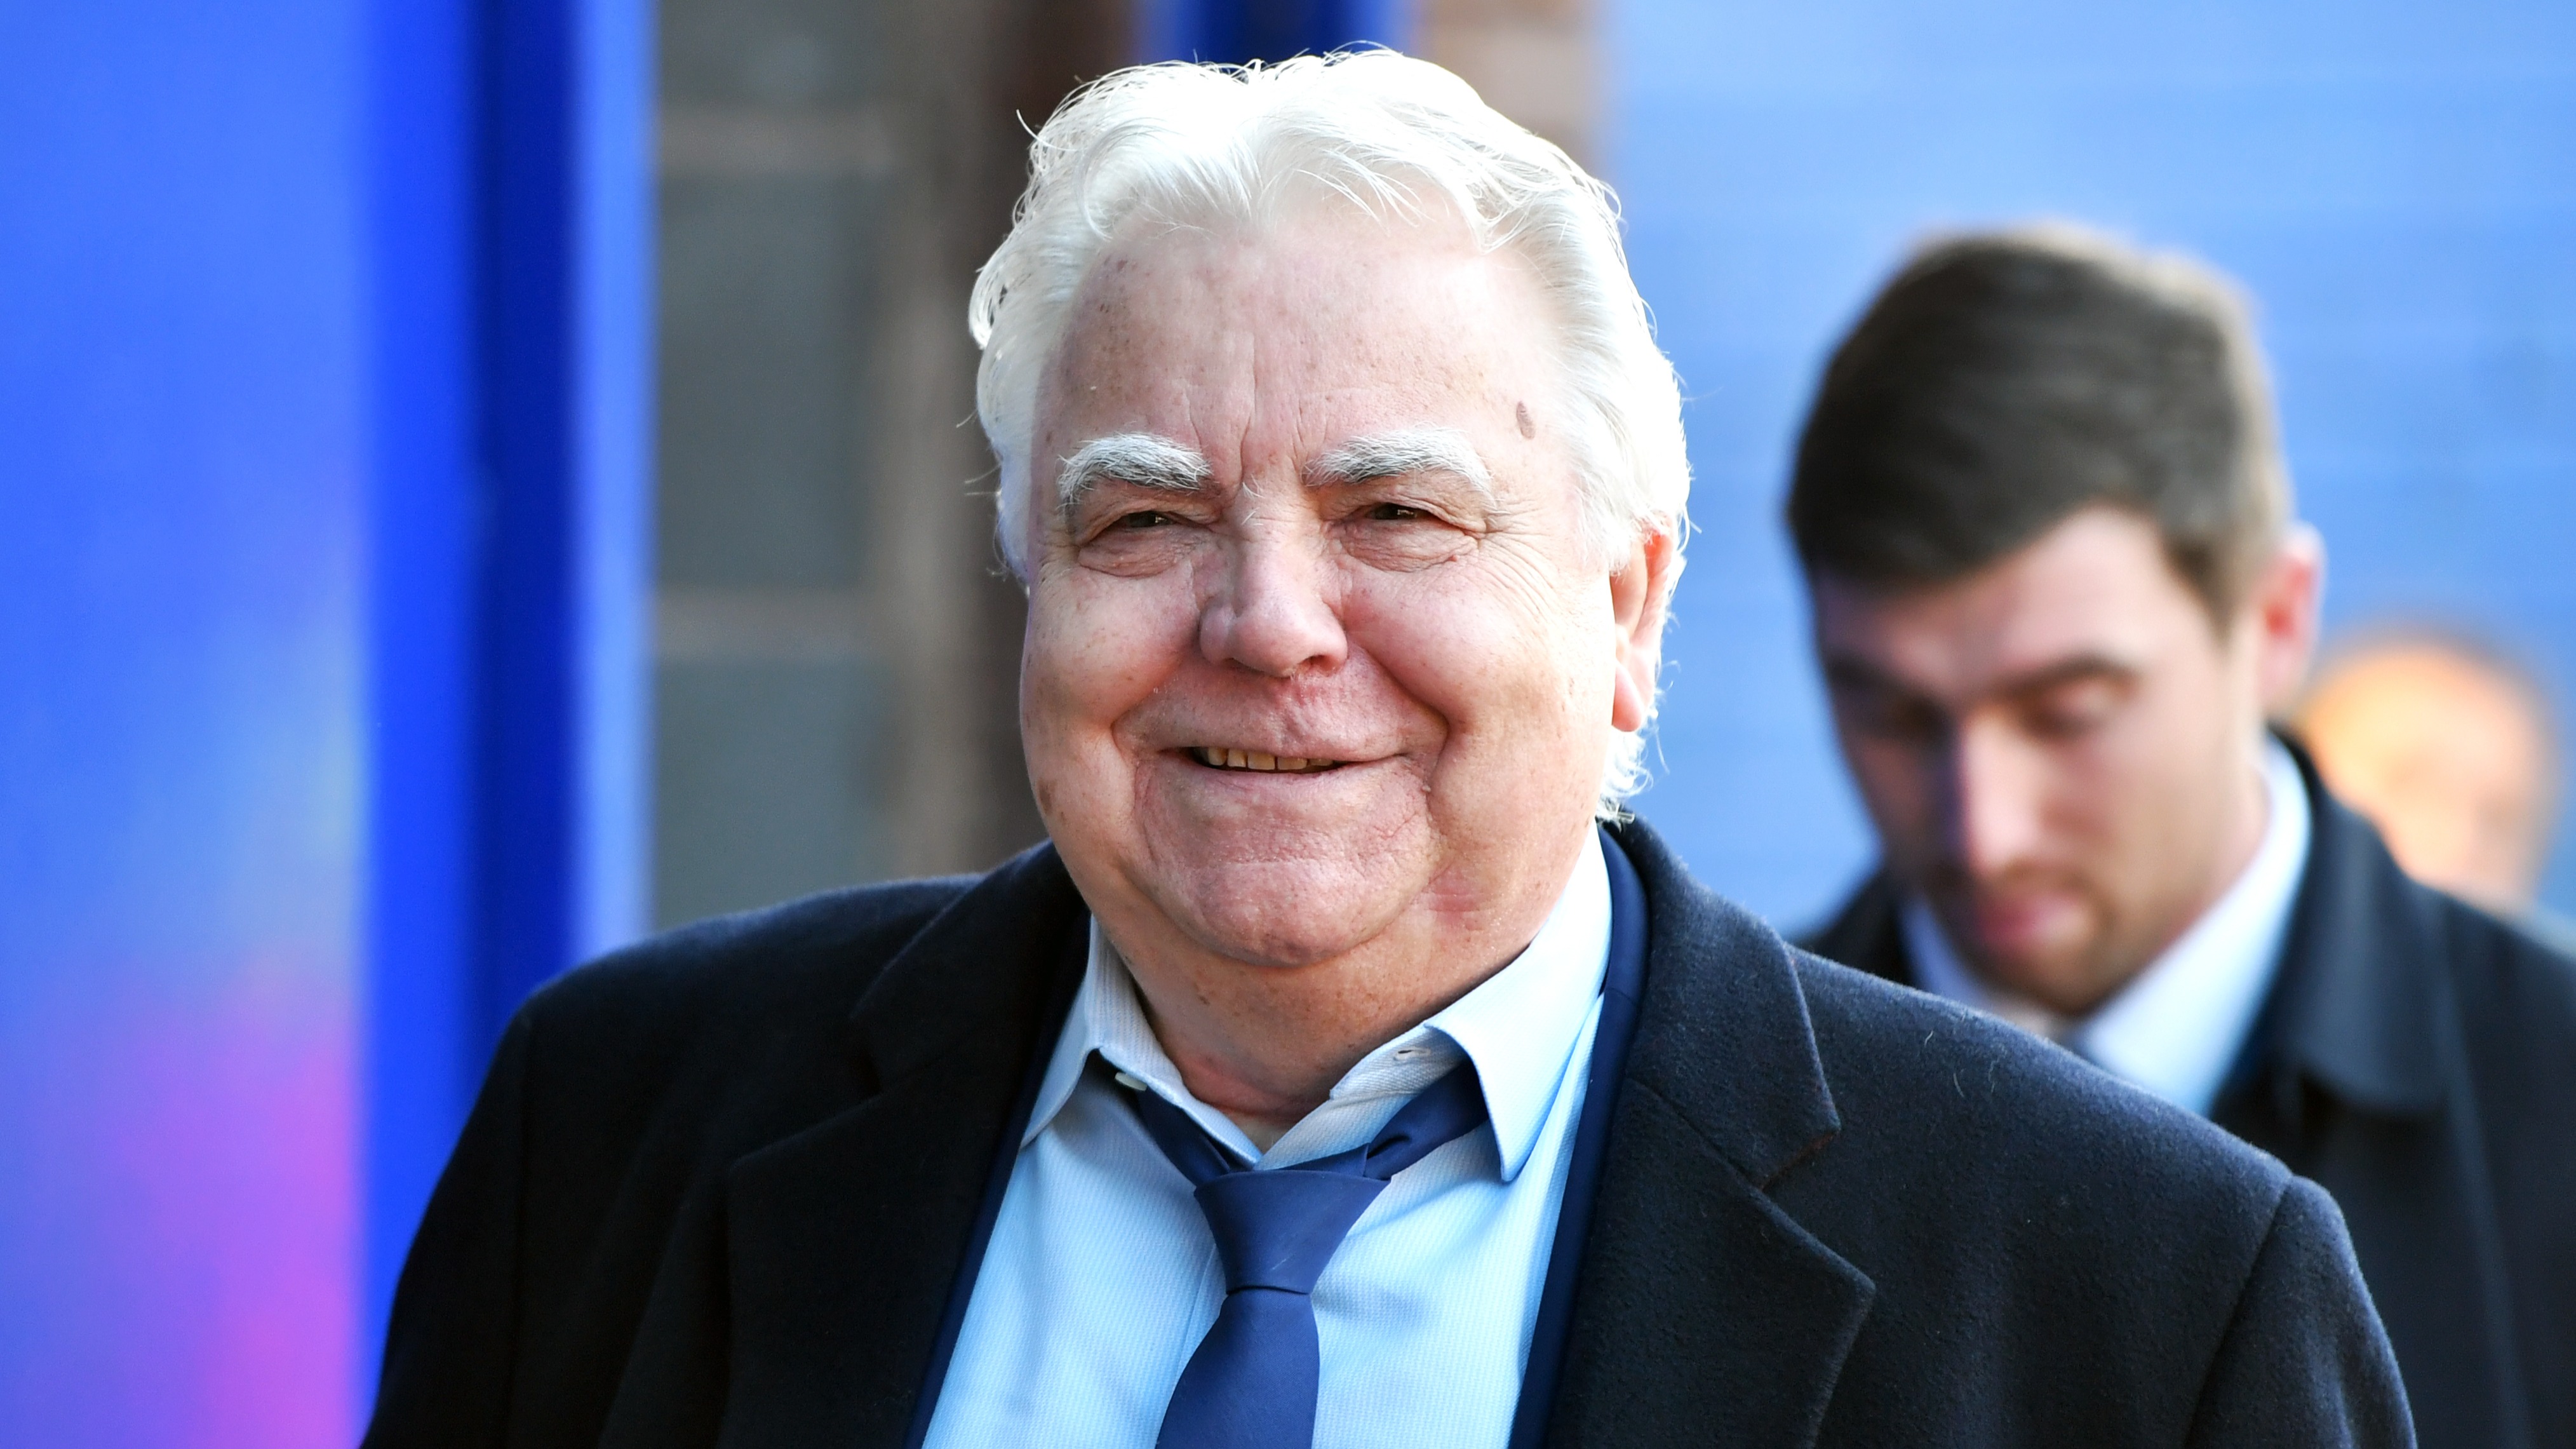 Everton FC chairman and entertainment producer Bill Kenwright dies at 78  after cancer battle | ITV News Granada